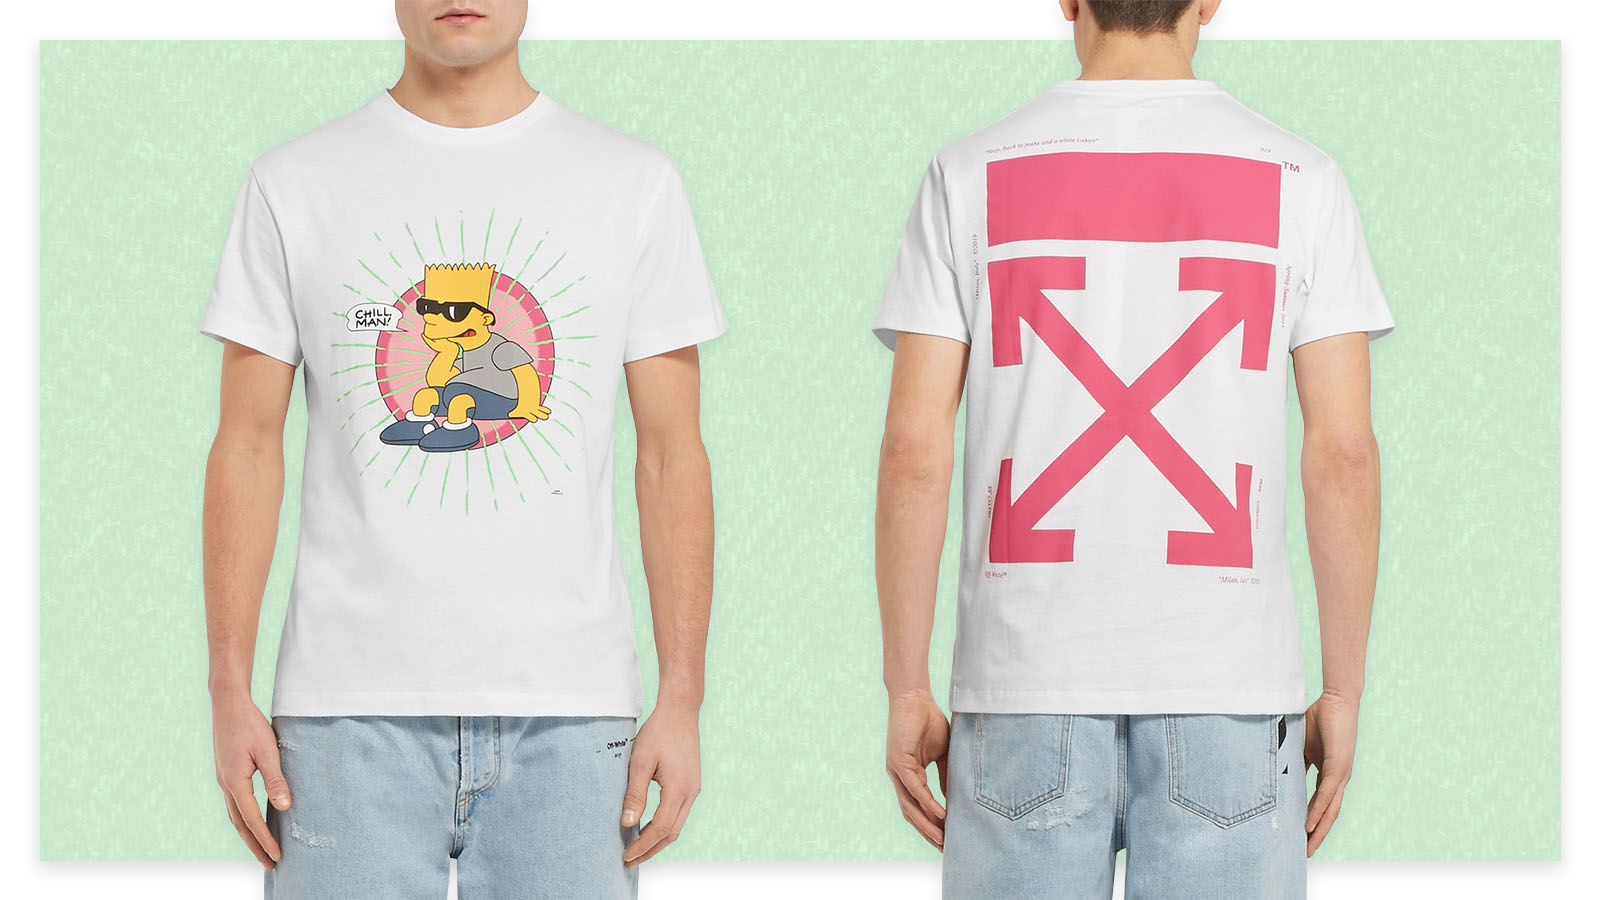 What's New: An Off-White X The Simpsons Collaboration | The Journal | MR  PORTER